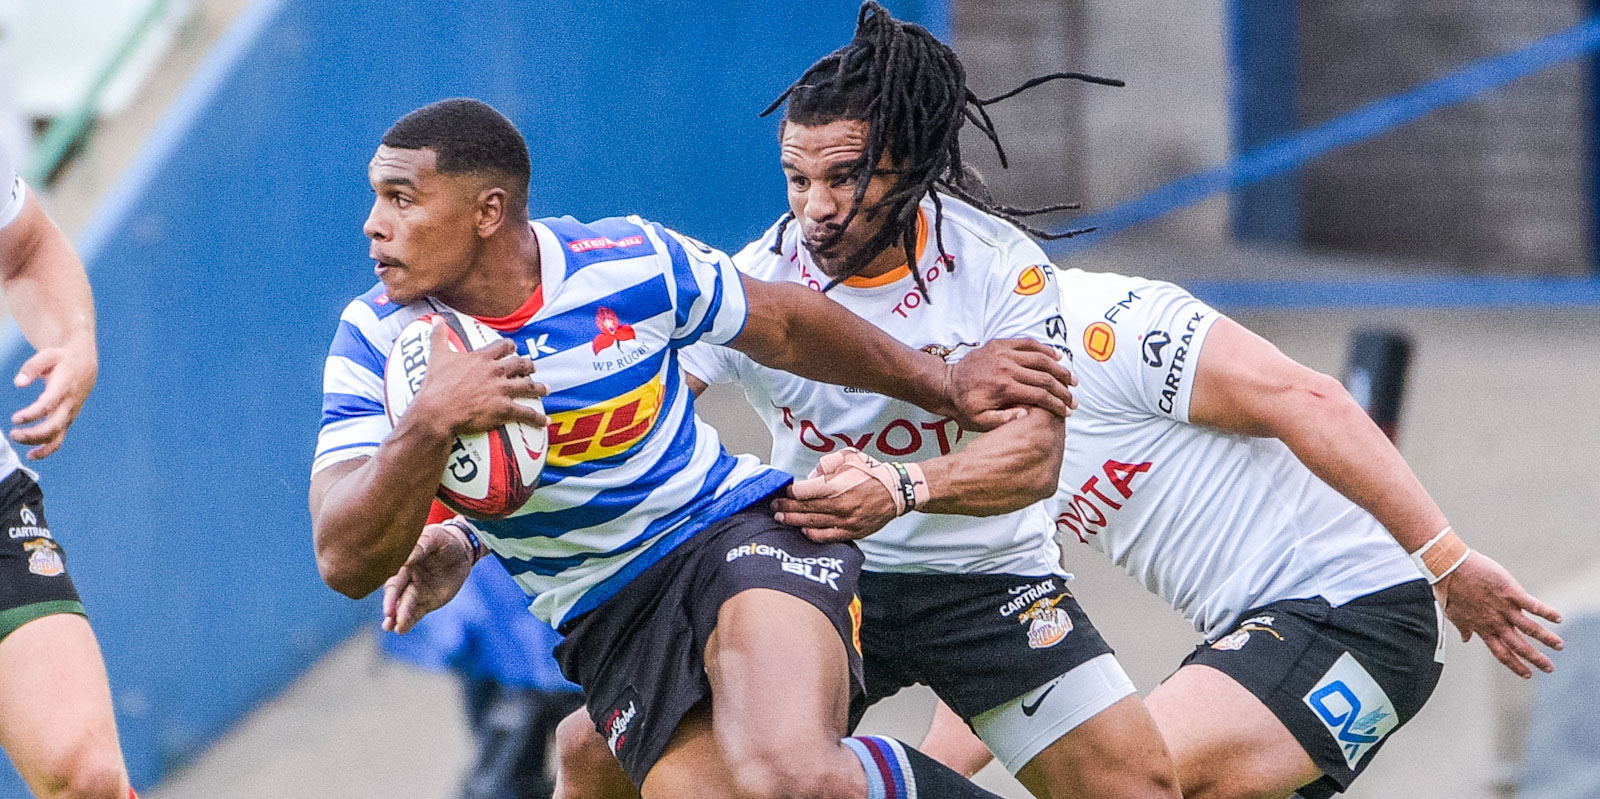 The Toyota Cheetahs' Rosco Specman stops Damian Willemse of DHL WP